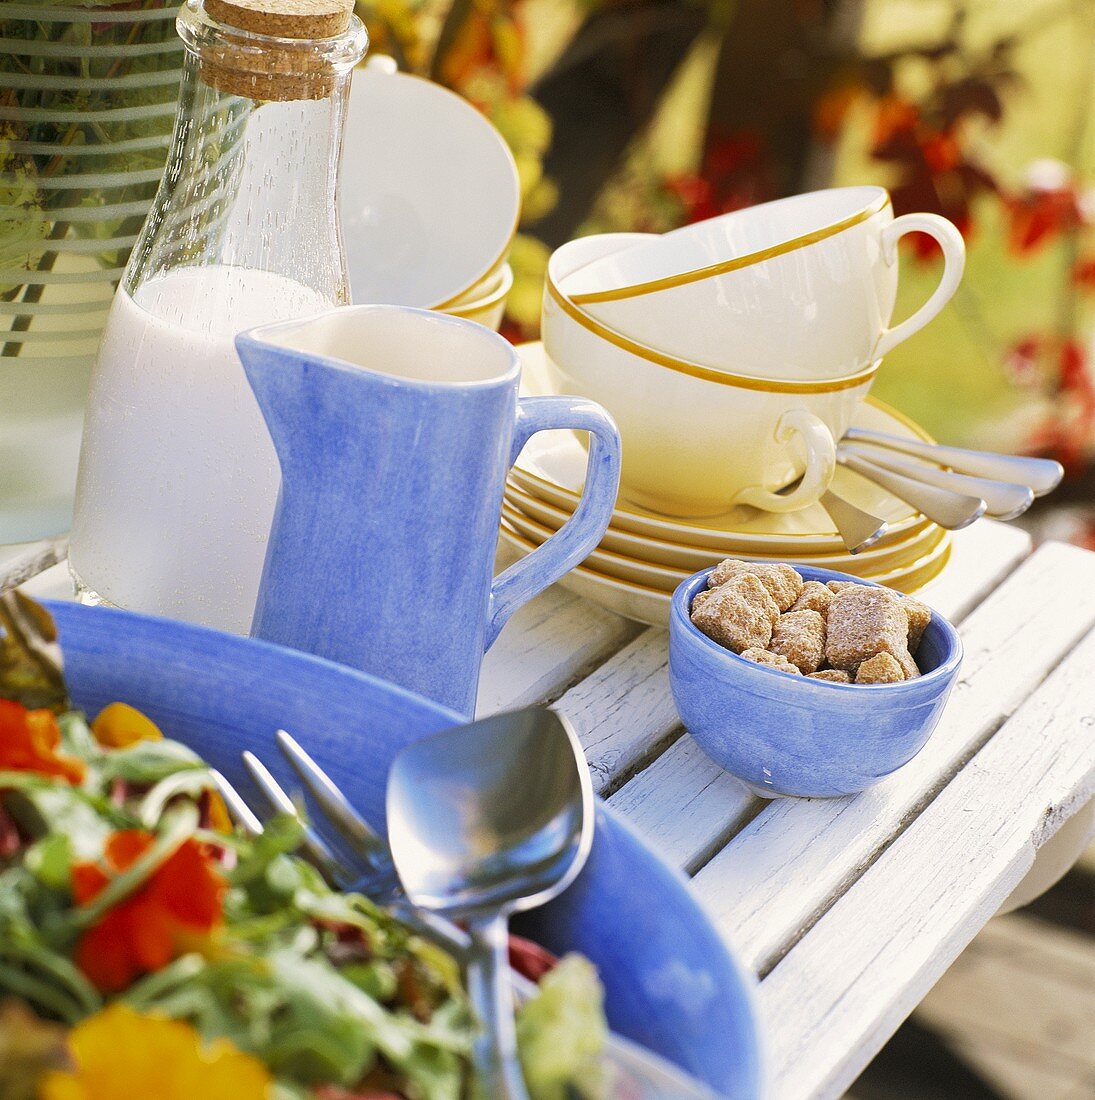 Salad, sugar, milk jug, cups & saucers on table out of doors